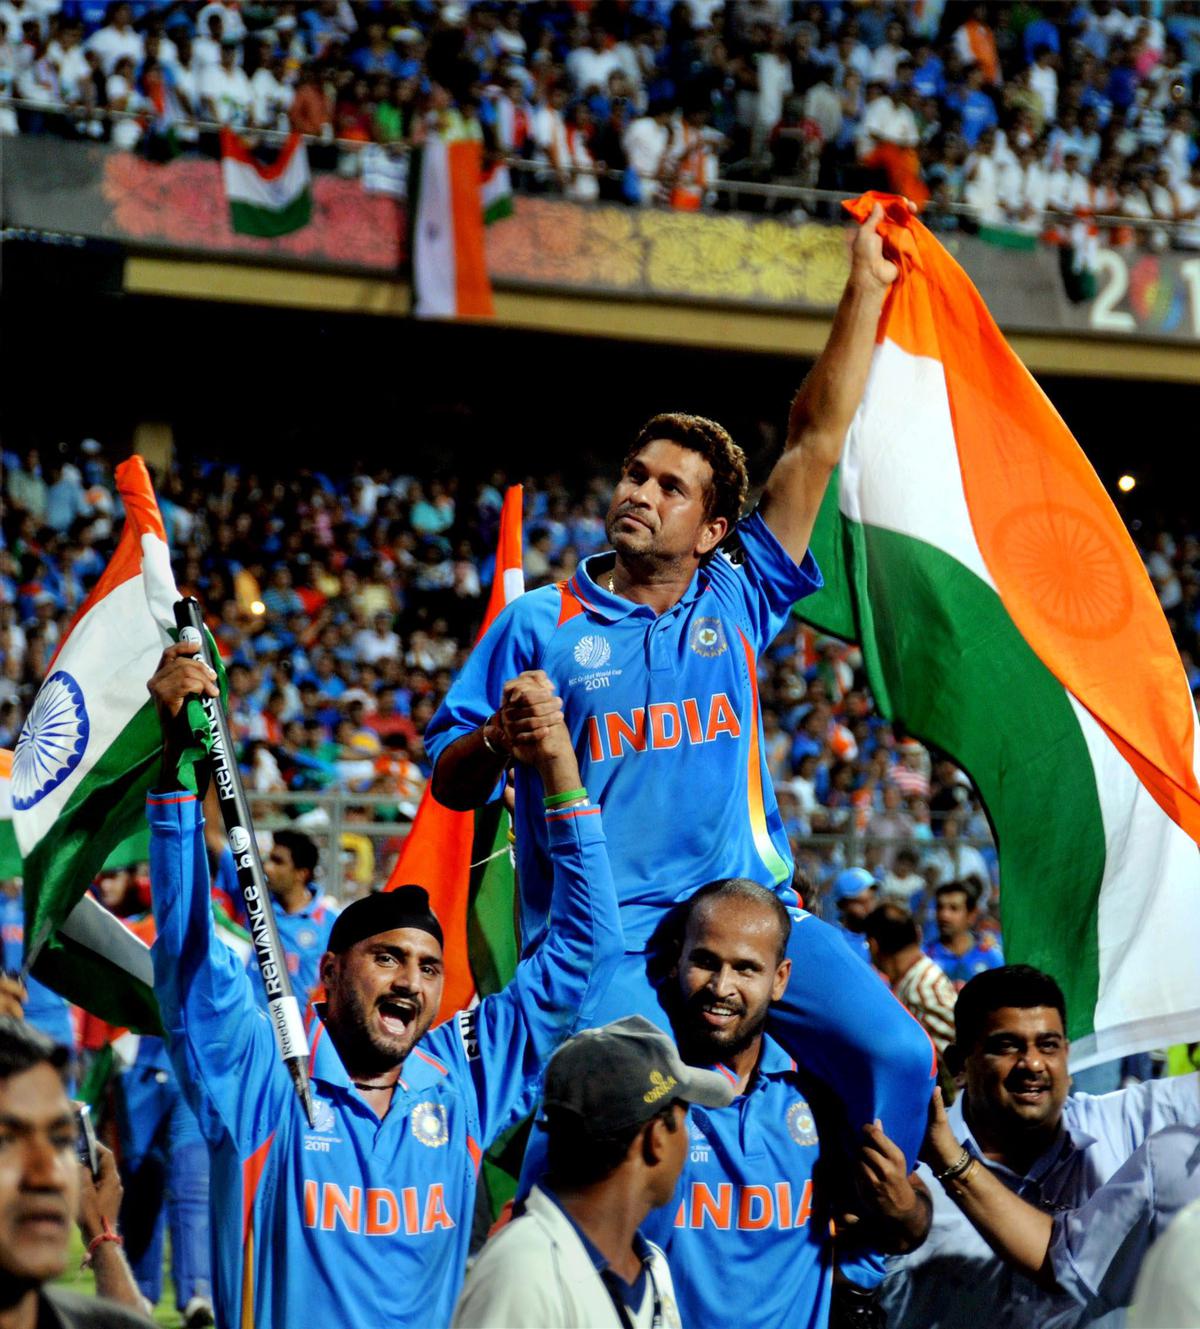 Sachin Tendulkar being carried around by teammates after India’s triumph in the 2011 ICC World Cup in Mumbai.